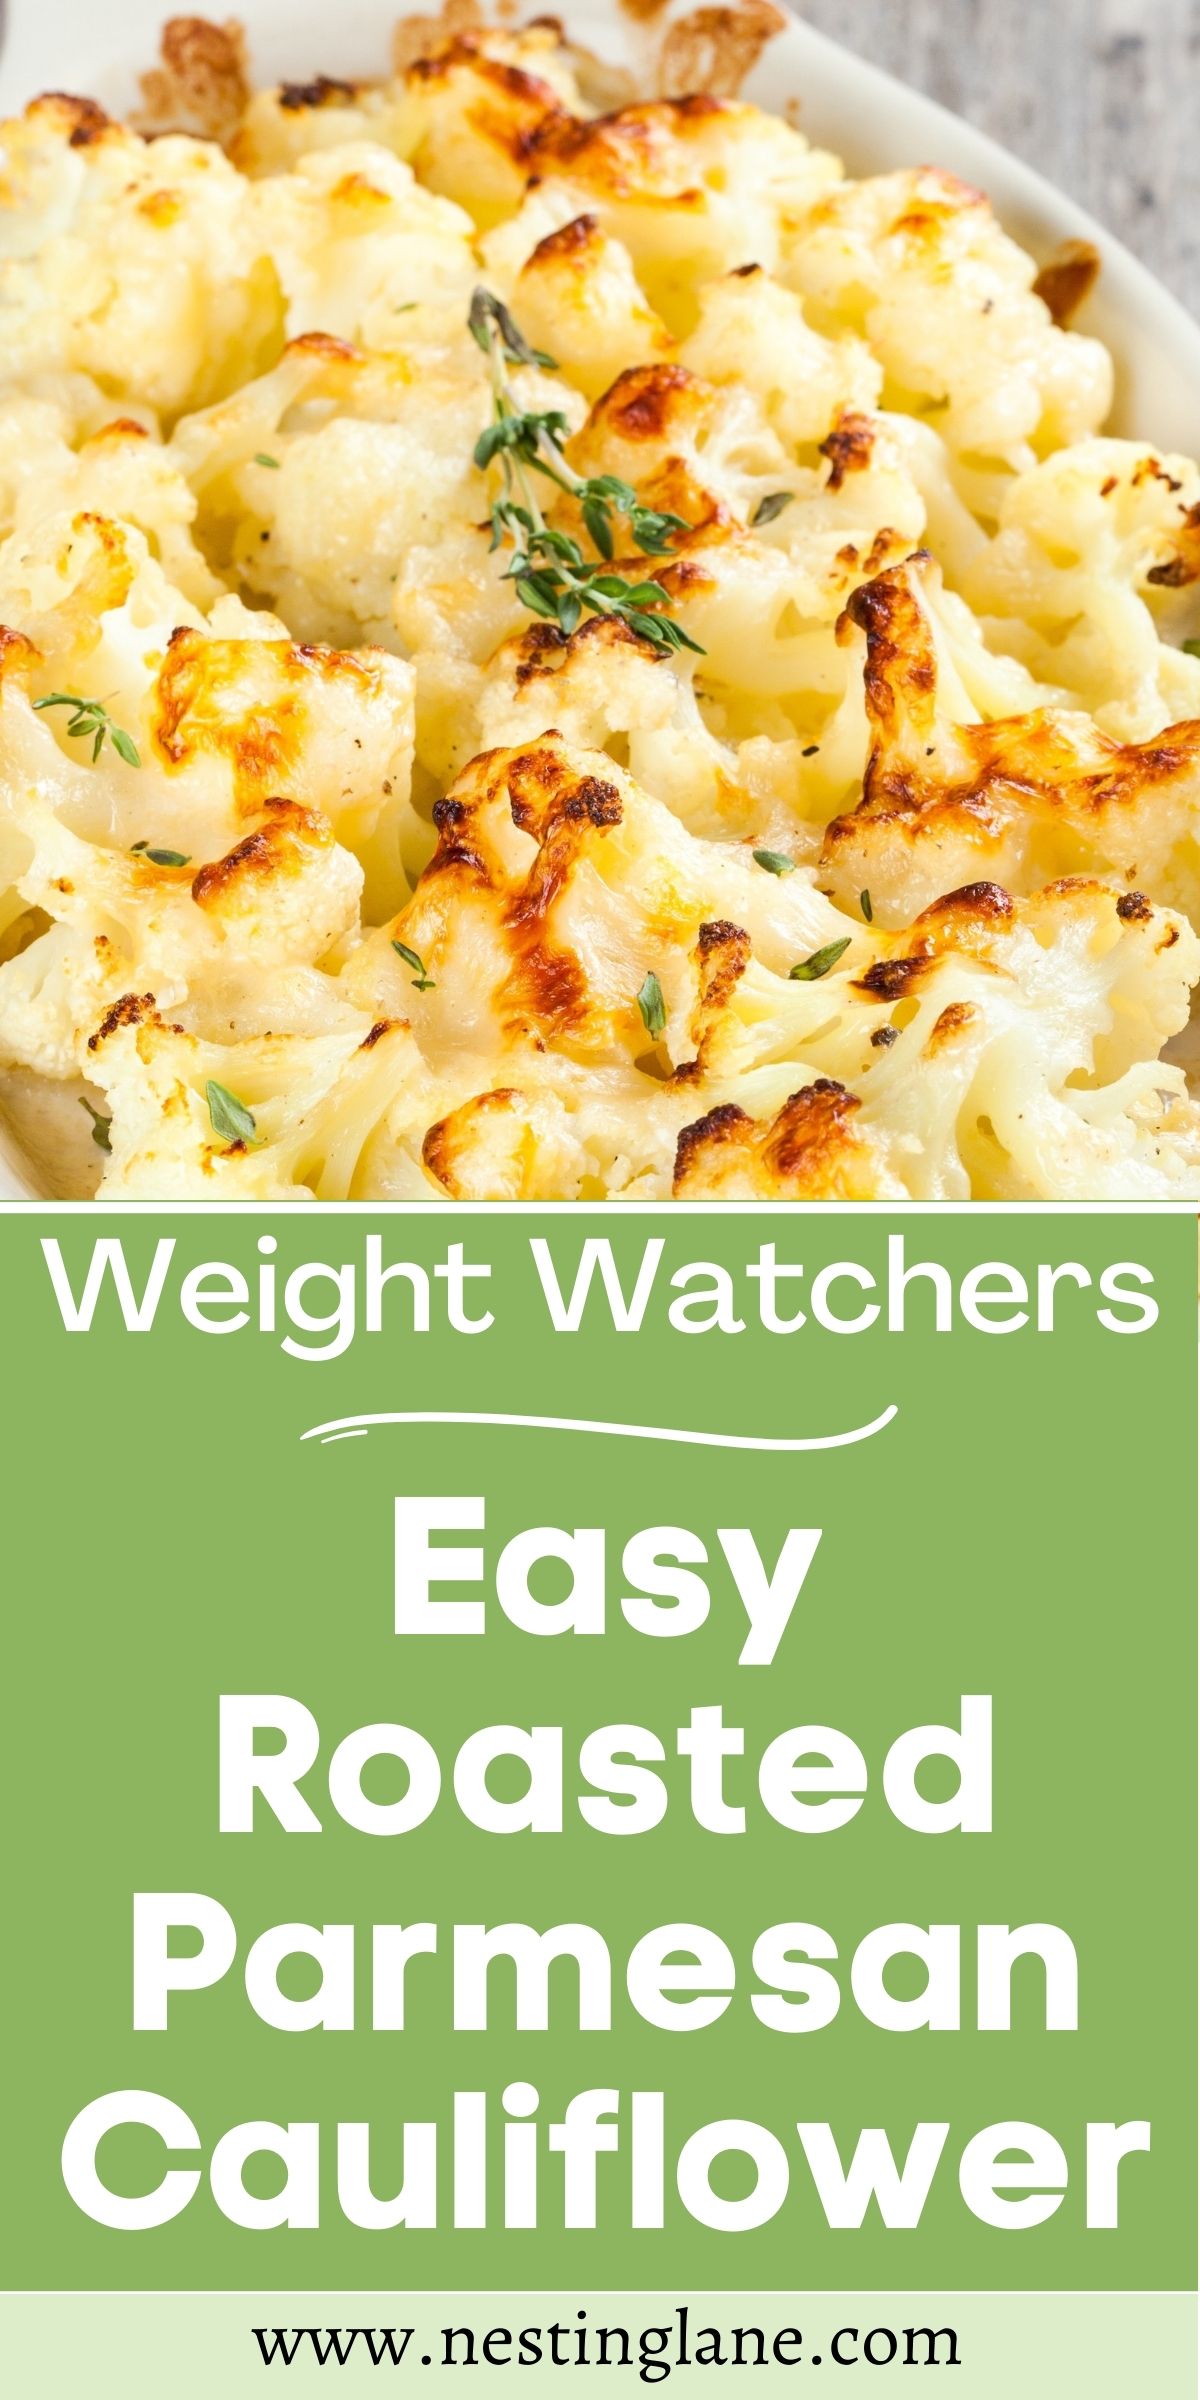 Graphic for Pinterest of Weight Watchers Roasted Parmesan Cauliflower Recipe.